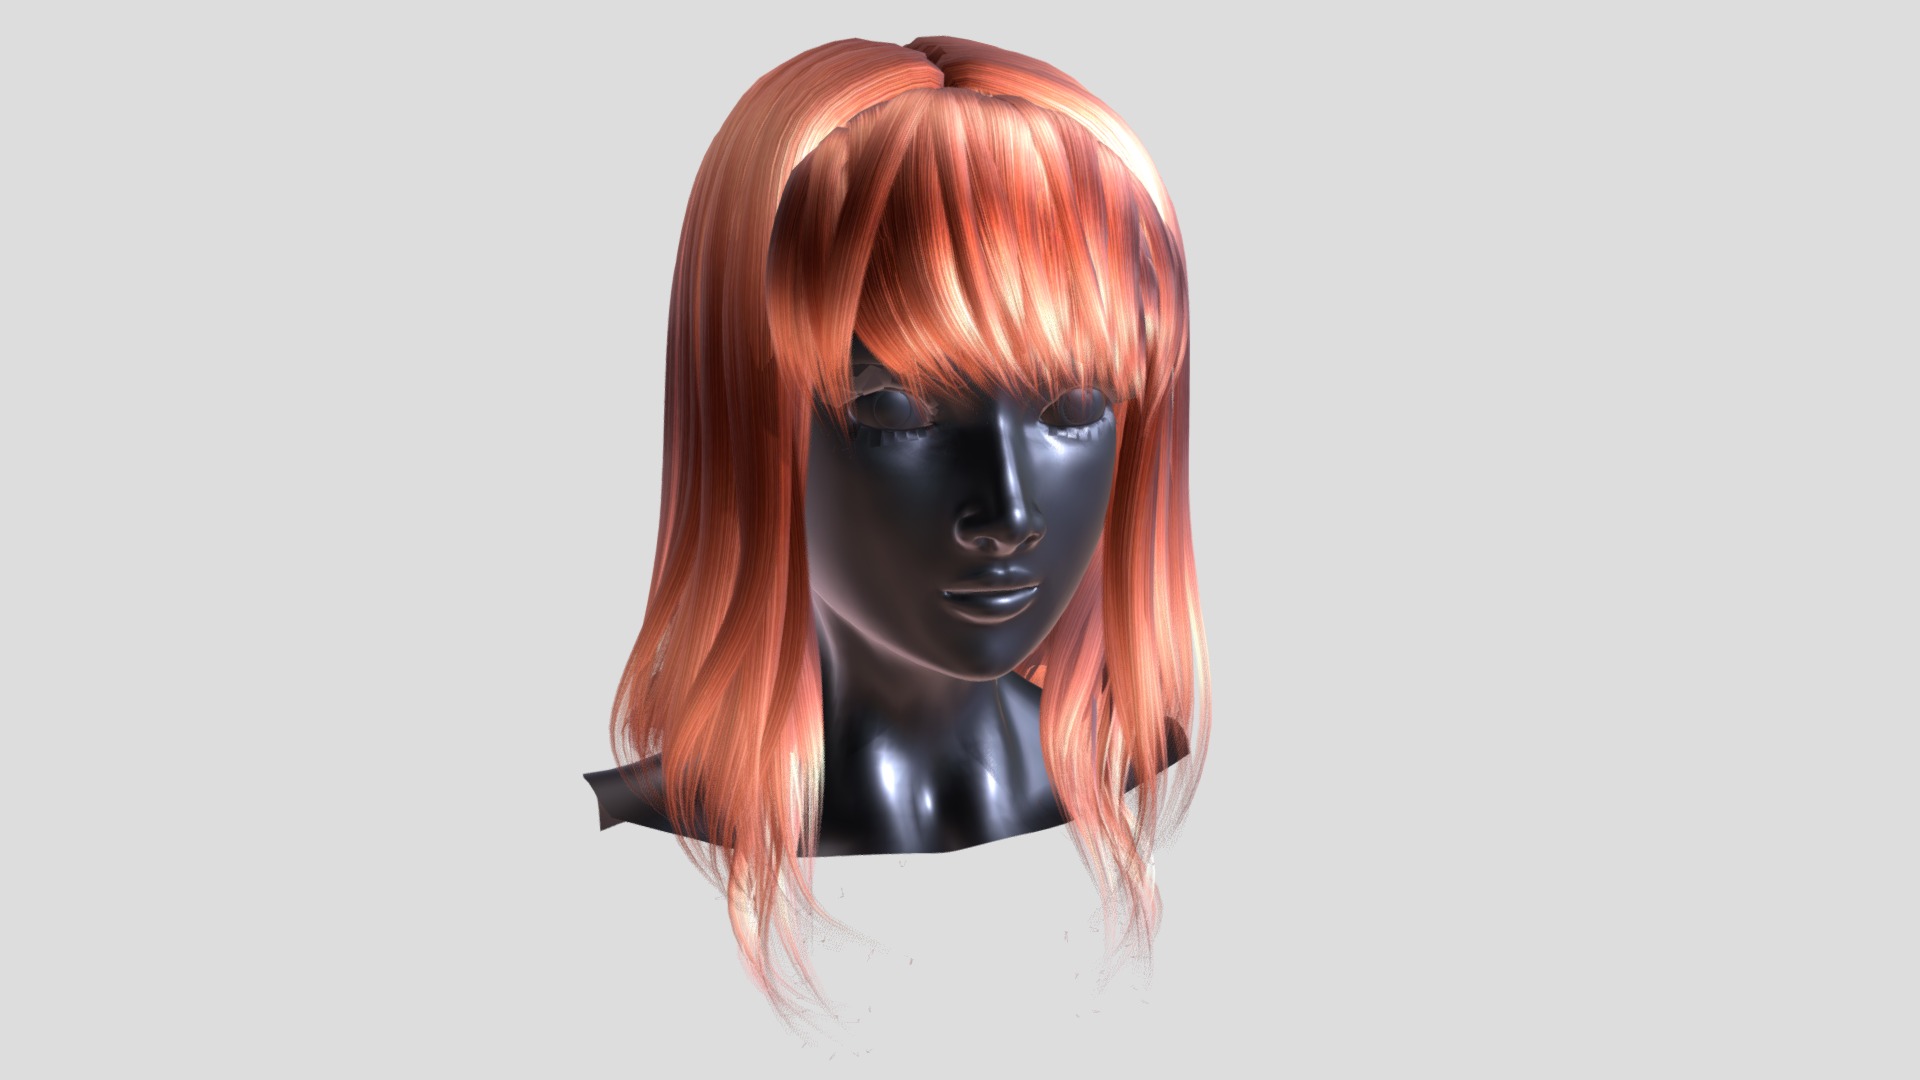 3D model Pocolov Hair 08 - This is a 3D model of the Pocolov Hair 08. The 3D model is about a person with red hair.